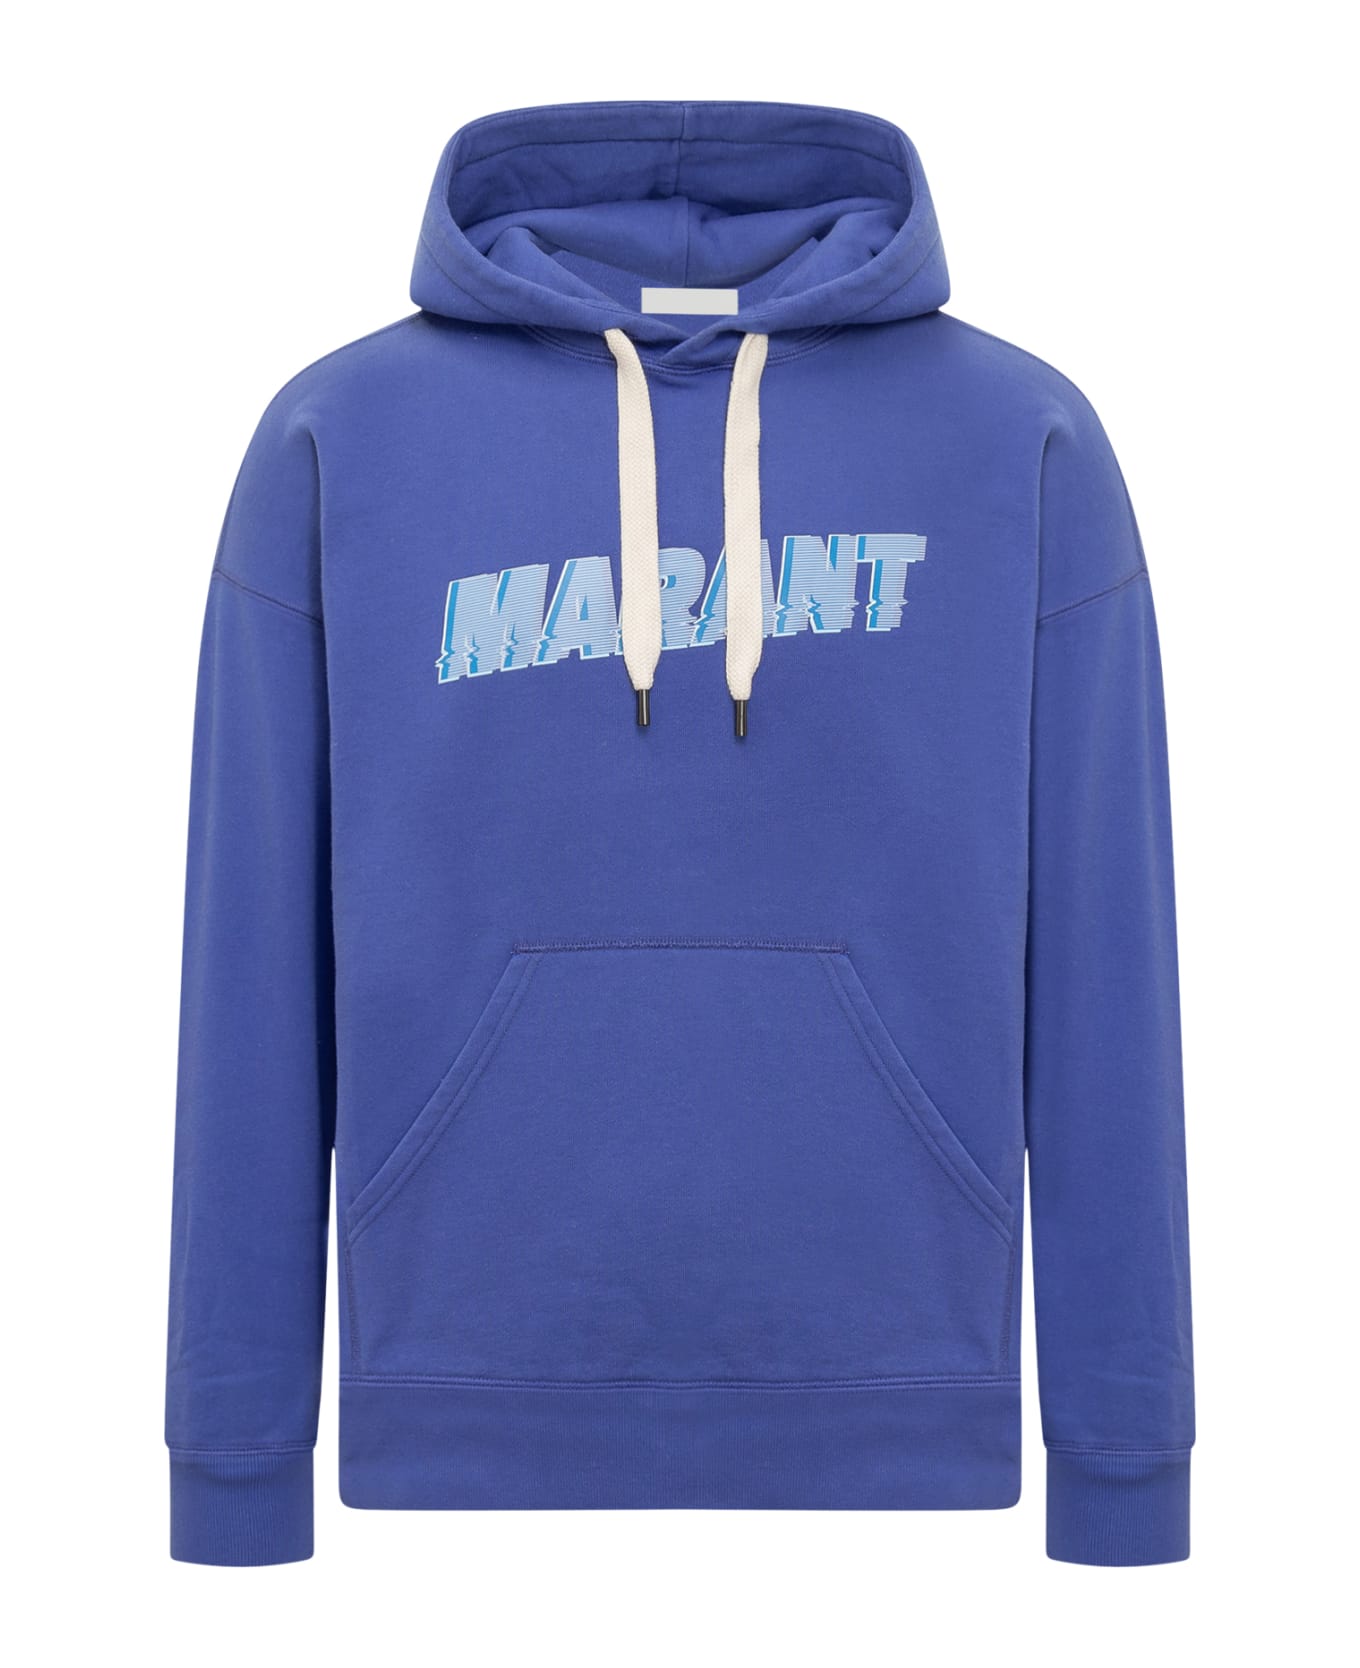 Isabel Marant Miley Logo Cotton Hoodie - ELECTRIC BLUE